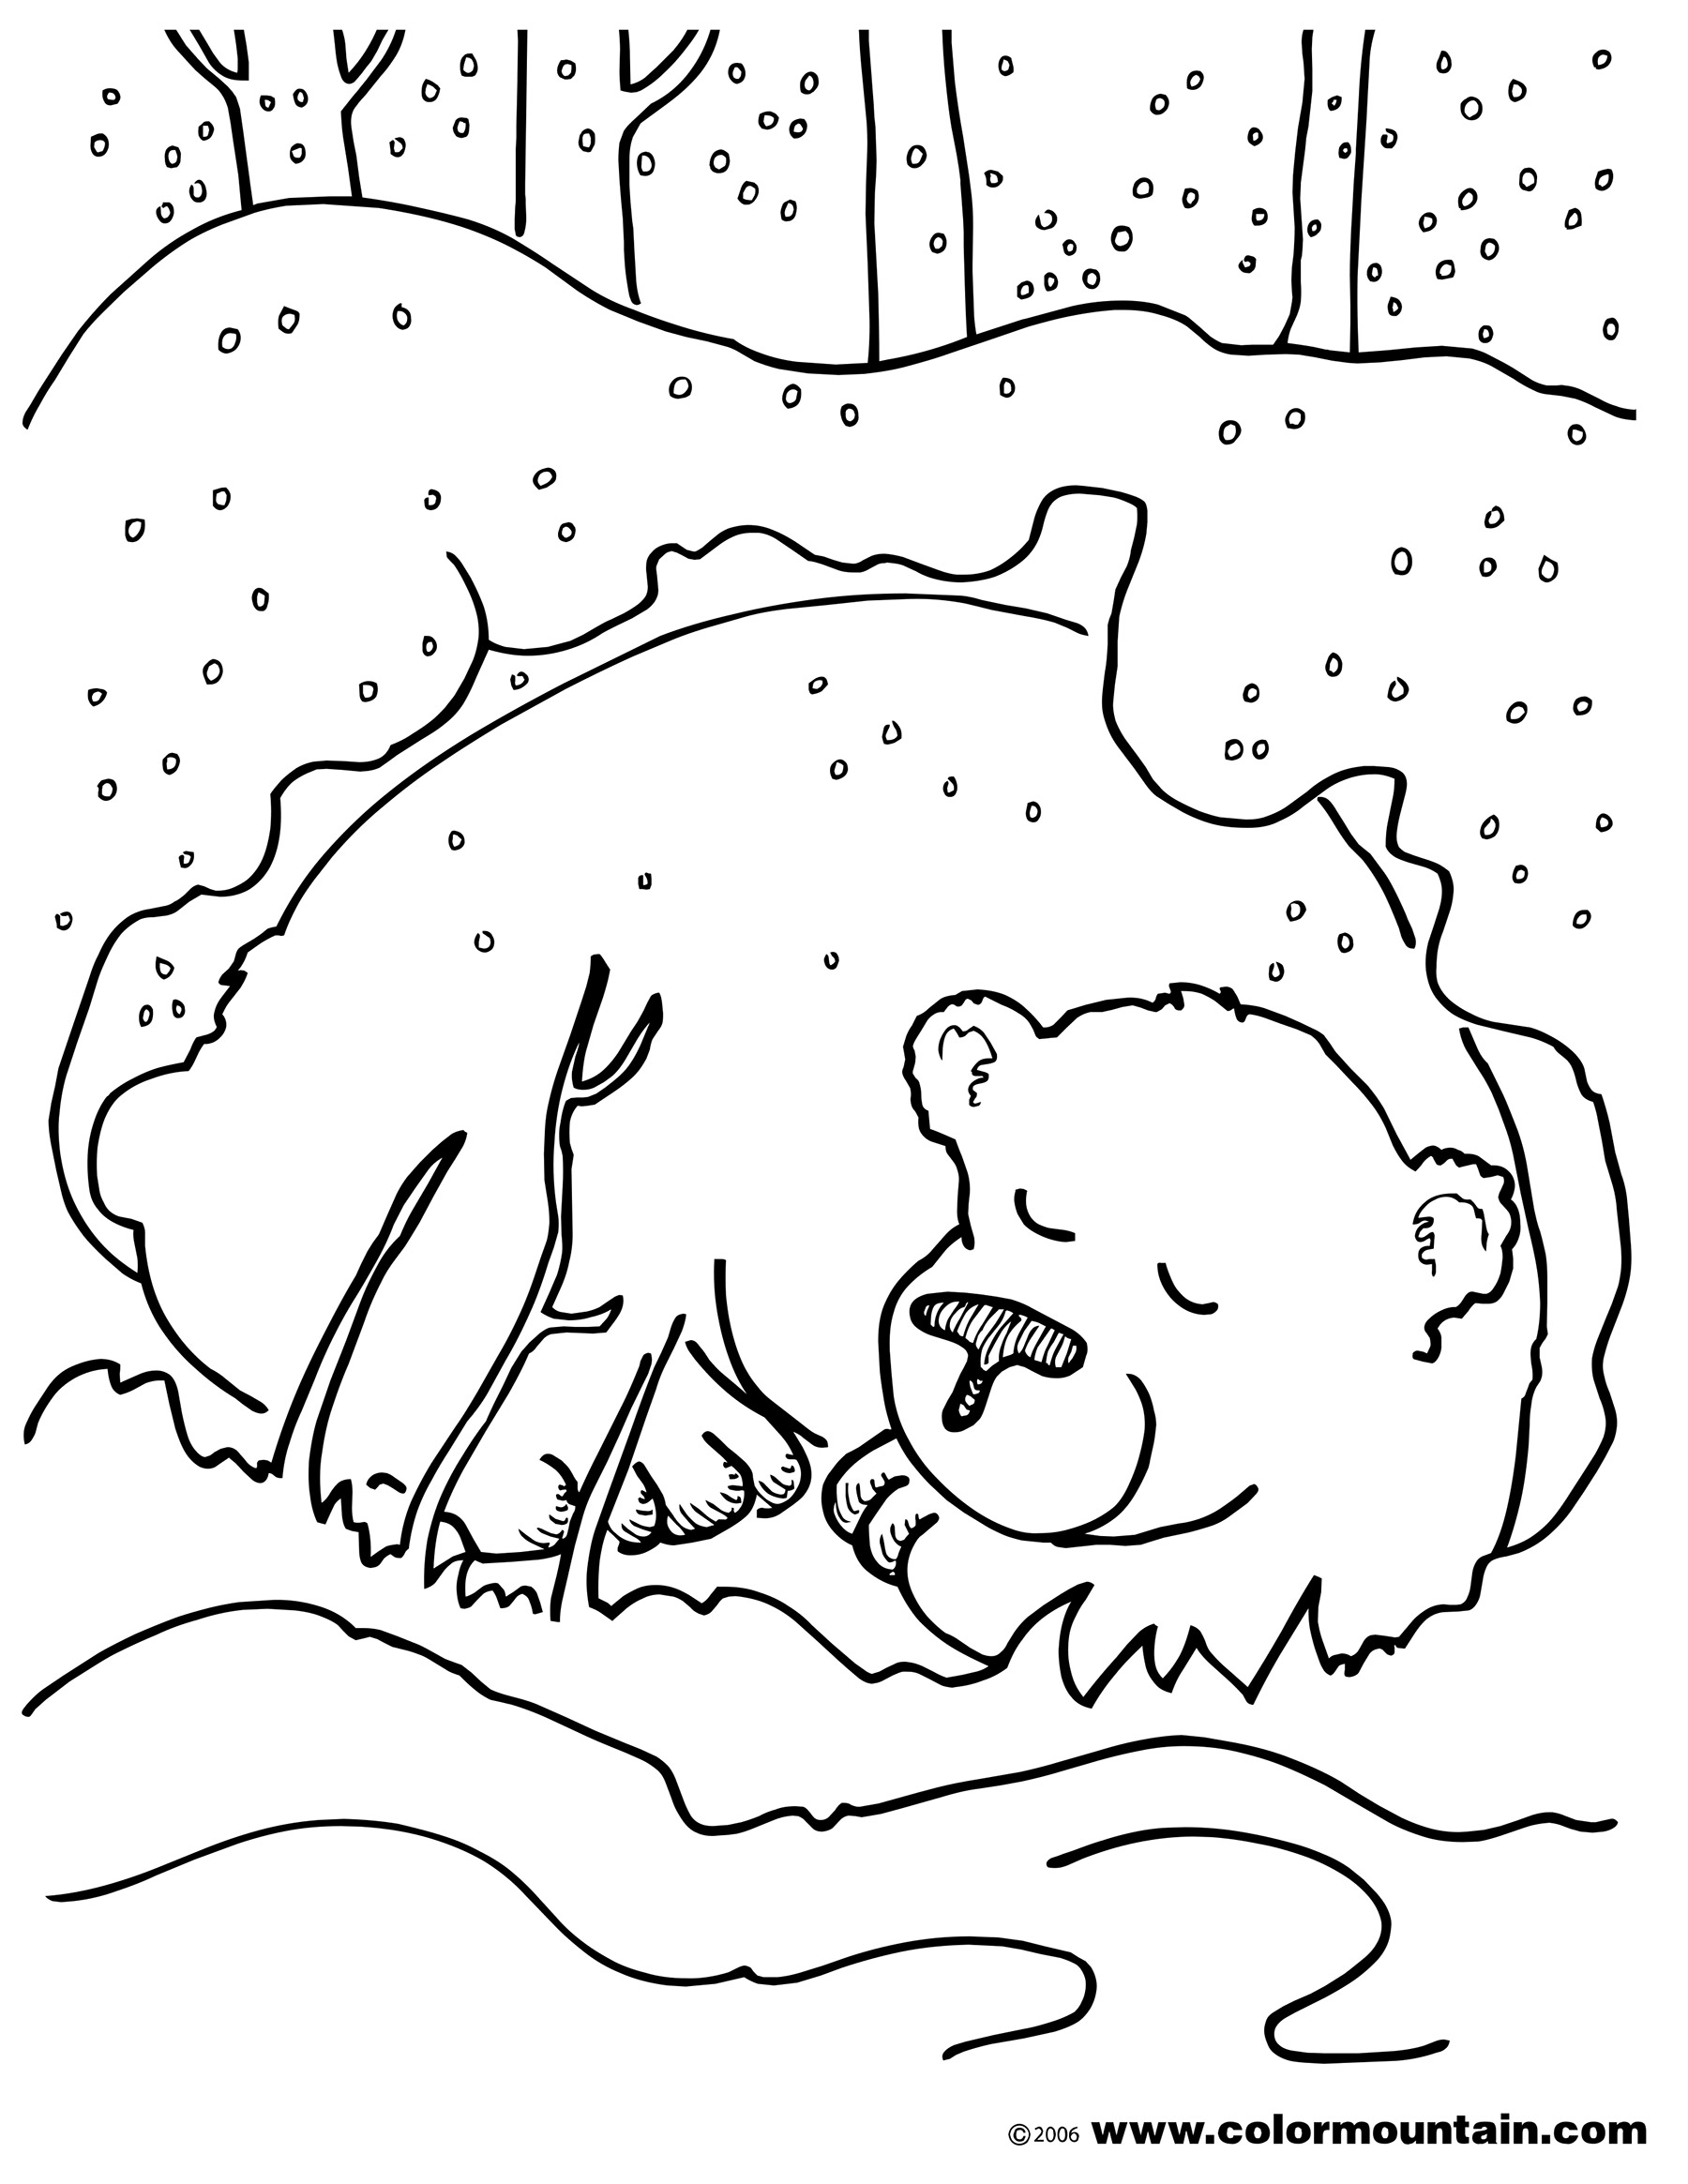 Amazing Brown Bear Coloring Page 15 For Coloring For Kids With ...